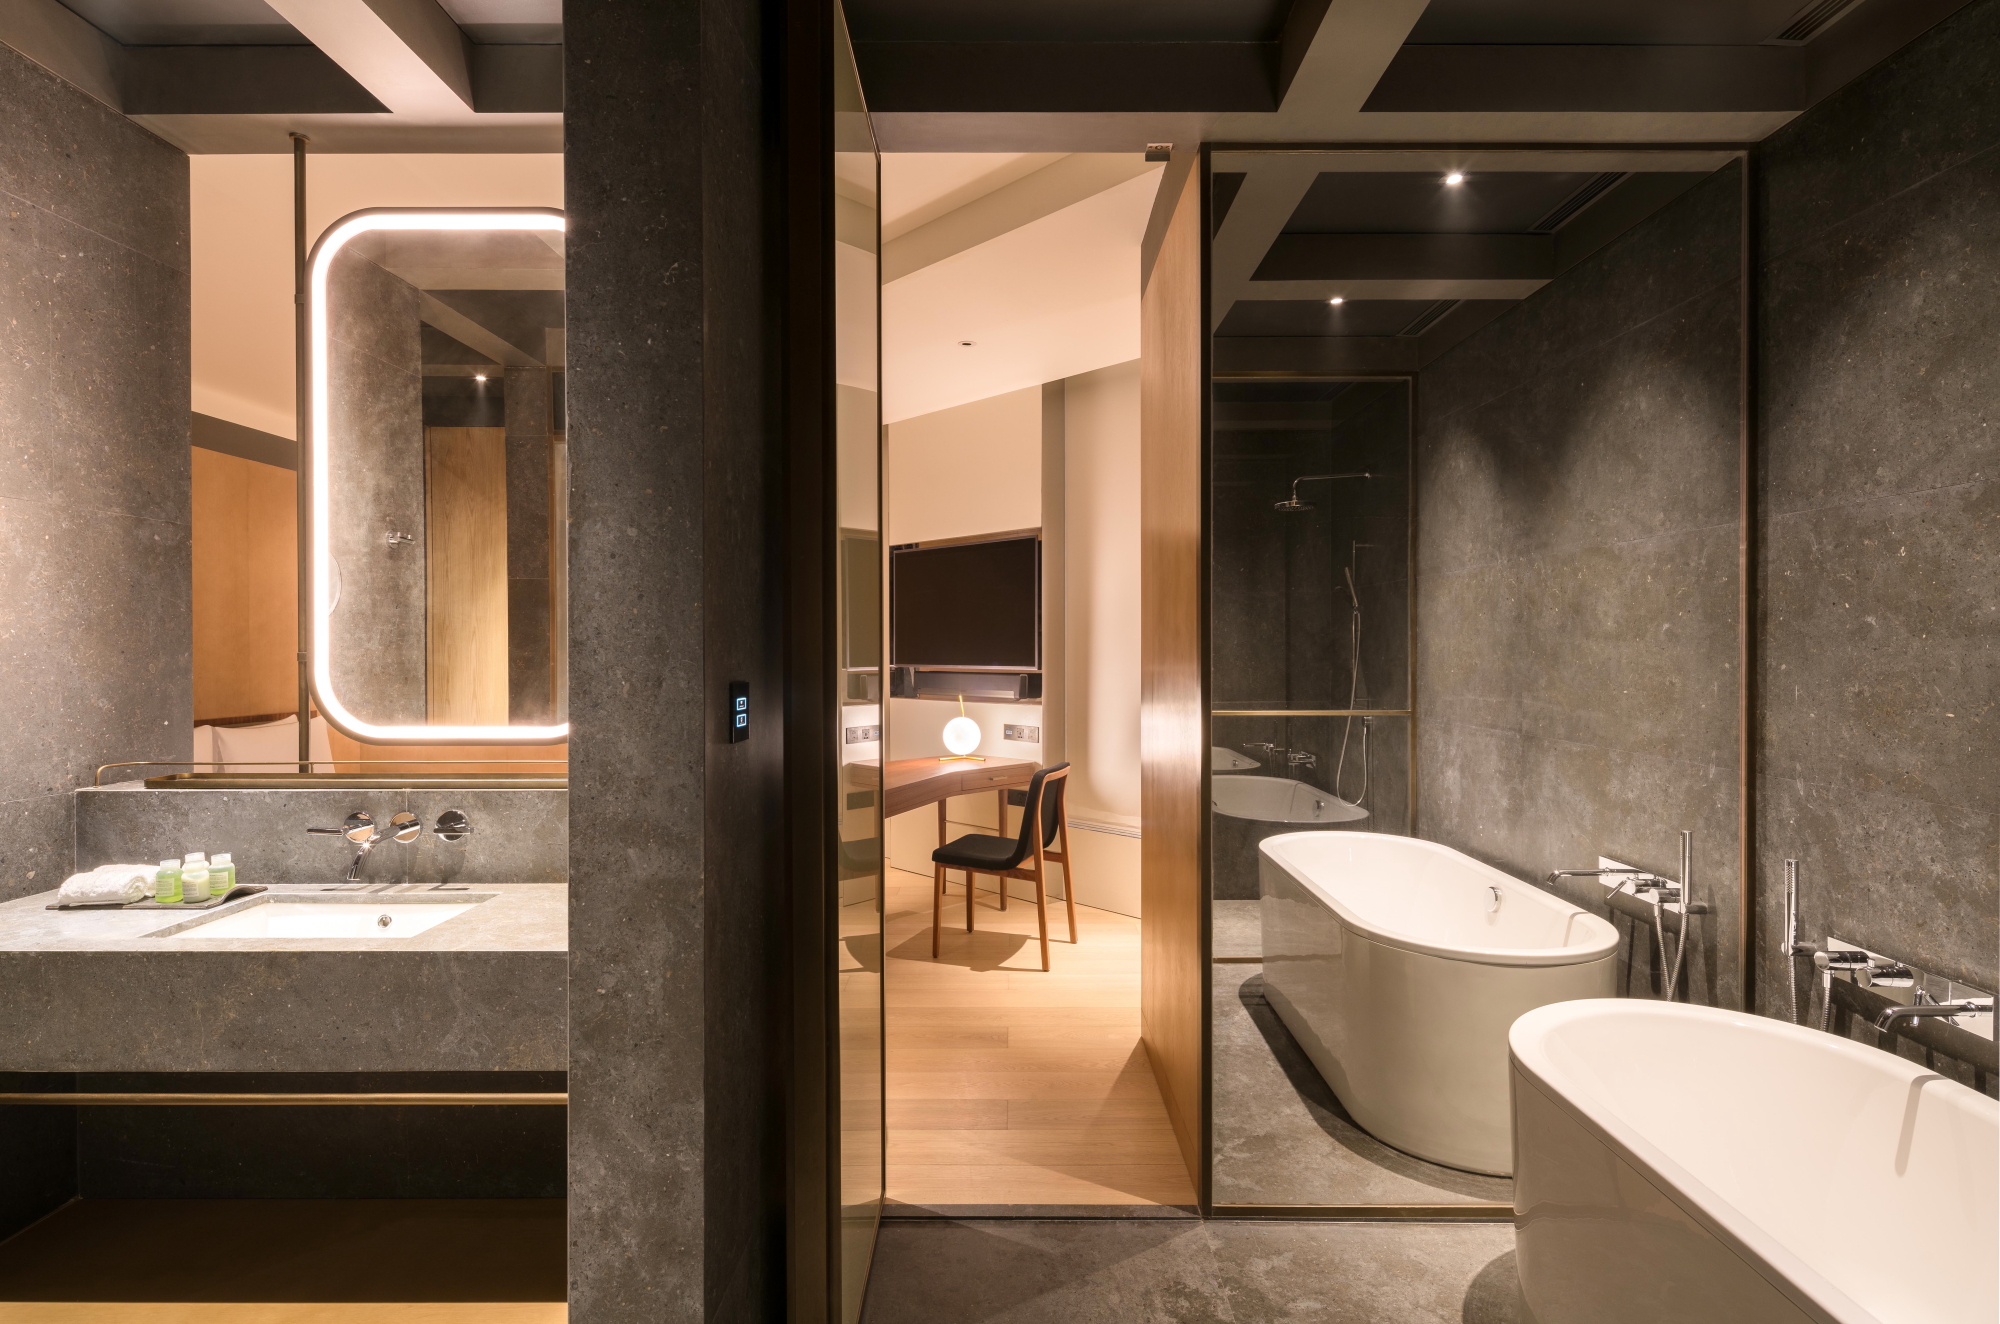 Bathroom of an Executive Room at the newly opened The Sukhothai Shanghai, a member of Small Luxury Hotels of the World. Click to enlarge.